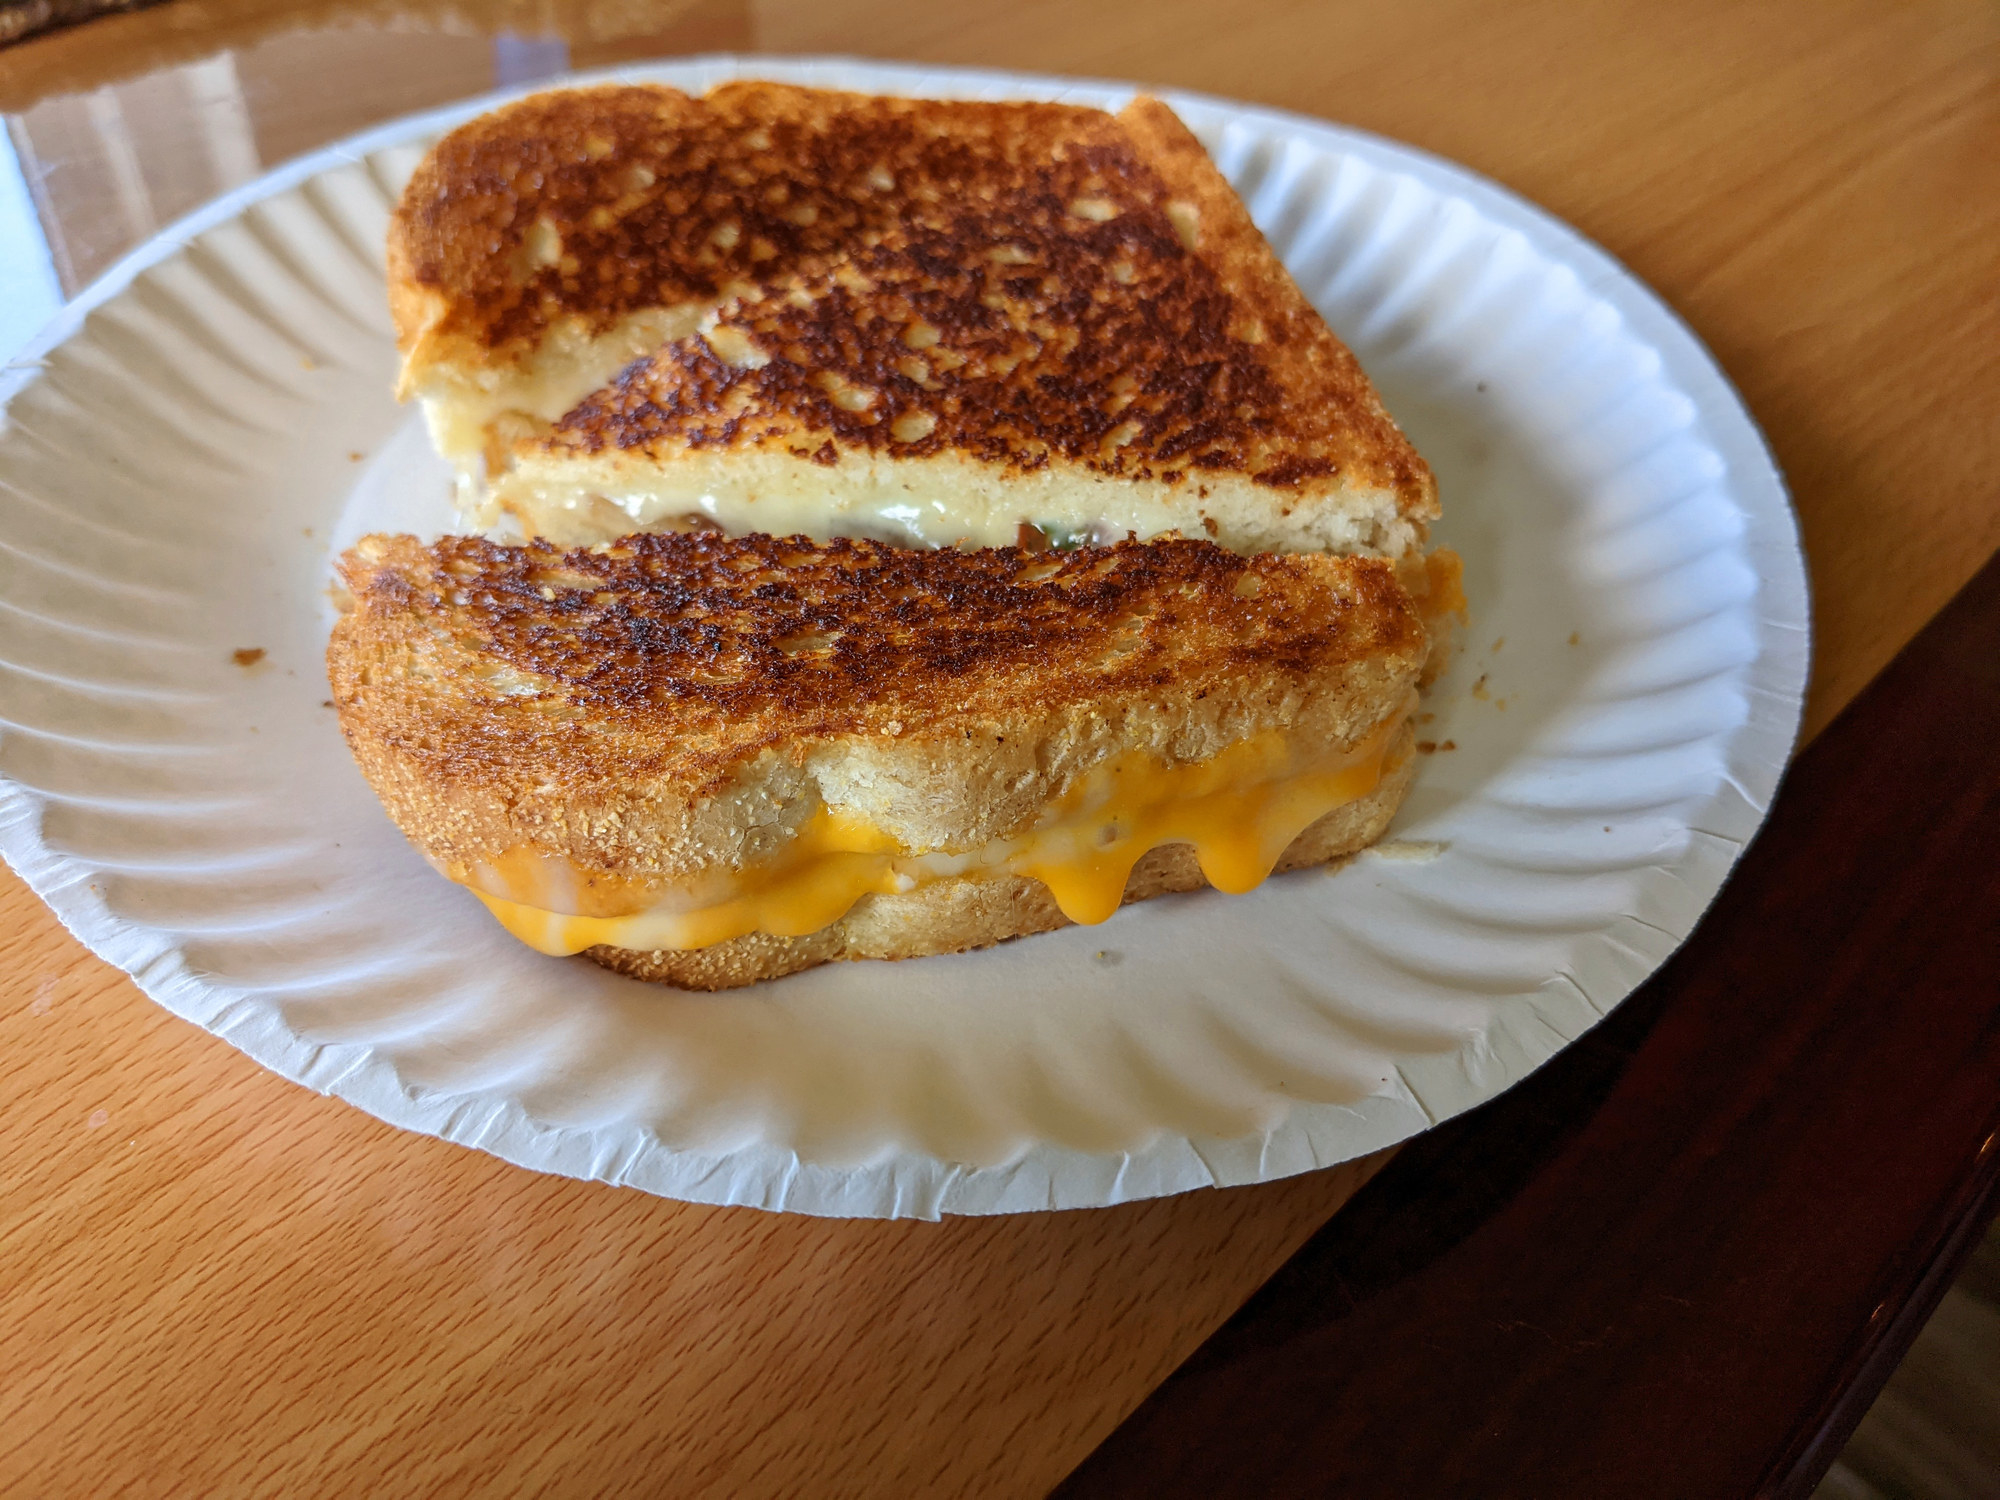 A grilled cheese sandwich on a plate.